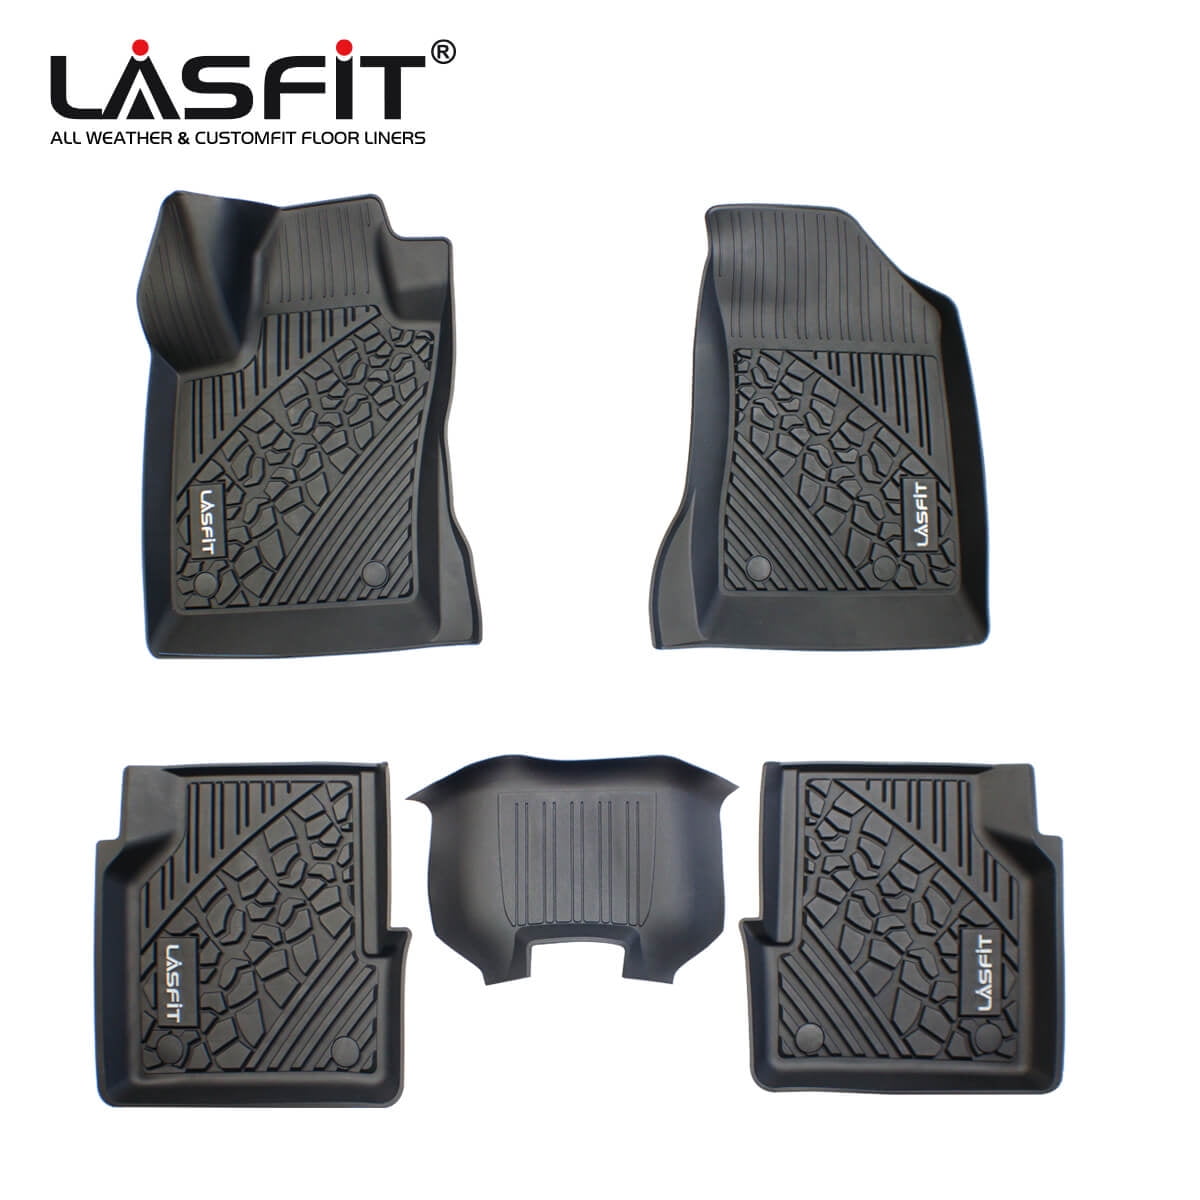 LASFIT Car Floor Liners for 2017-2020 Jeep Compass, All Weather Fit TPE Vehicle Floor Mats Set 2020 Jeep Compass All Weather Floor Mats